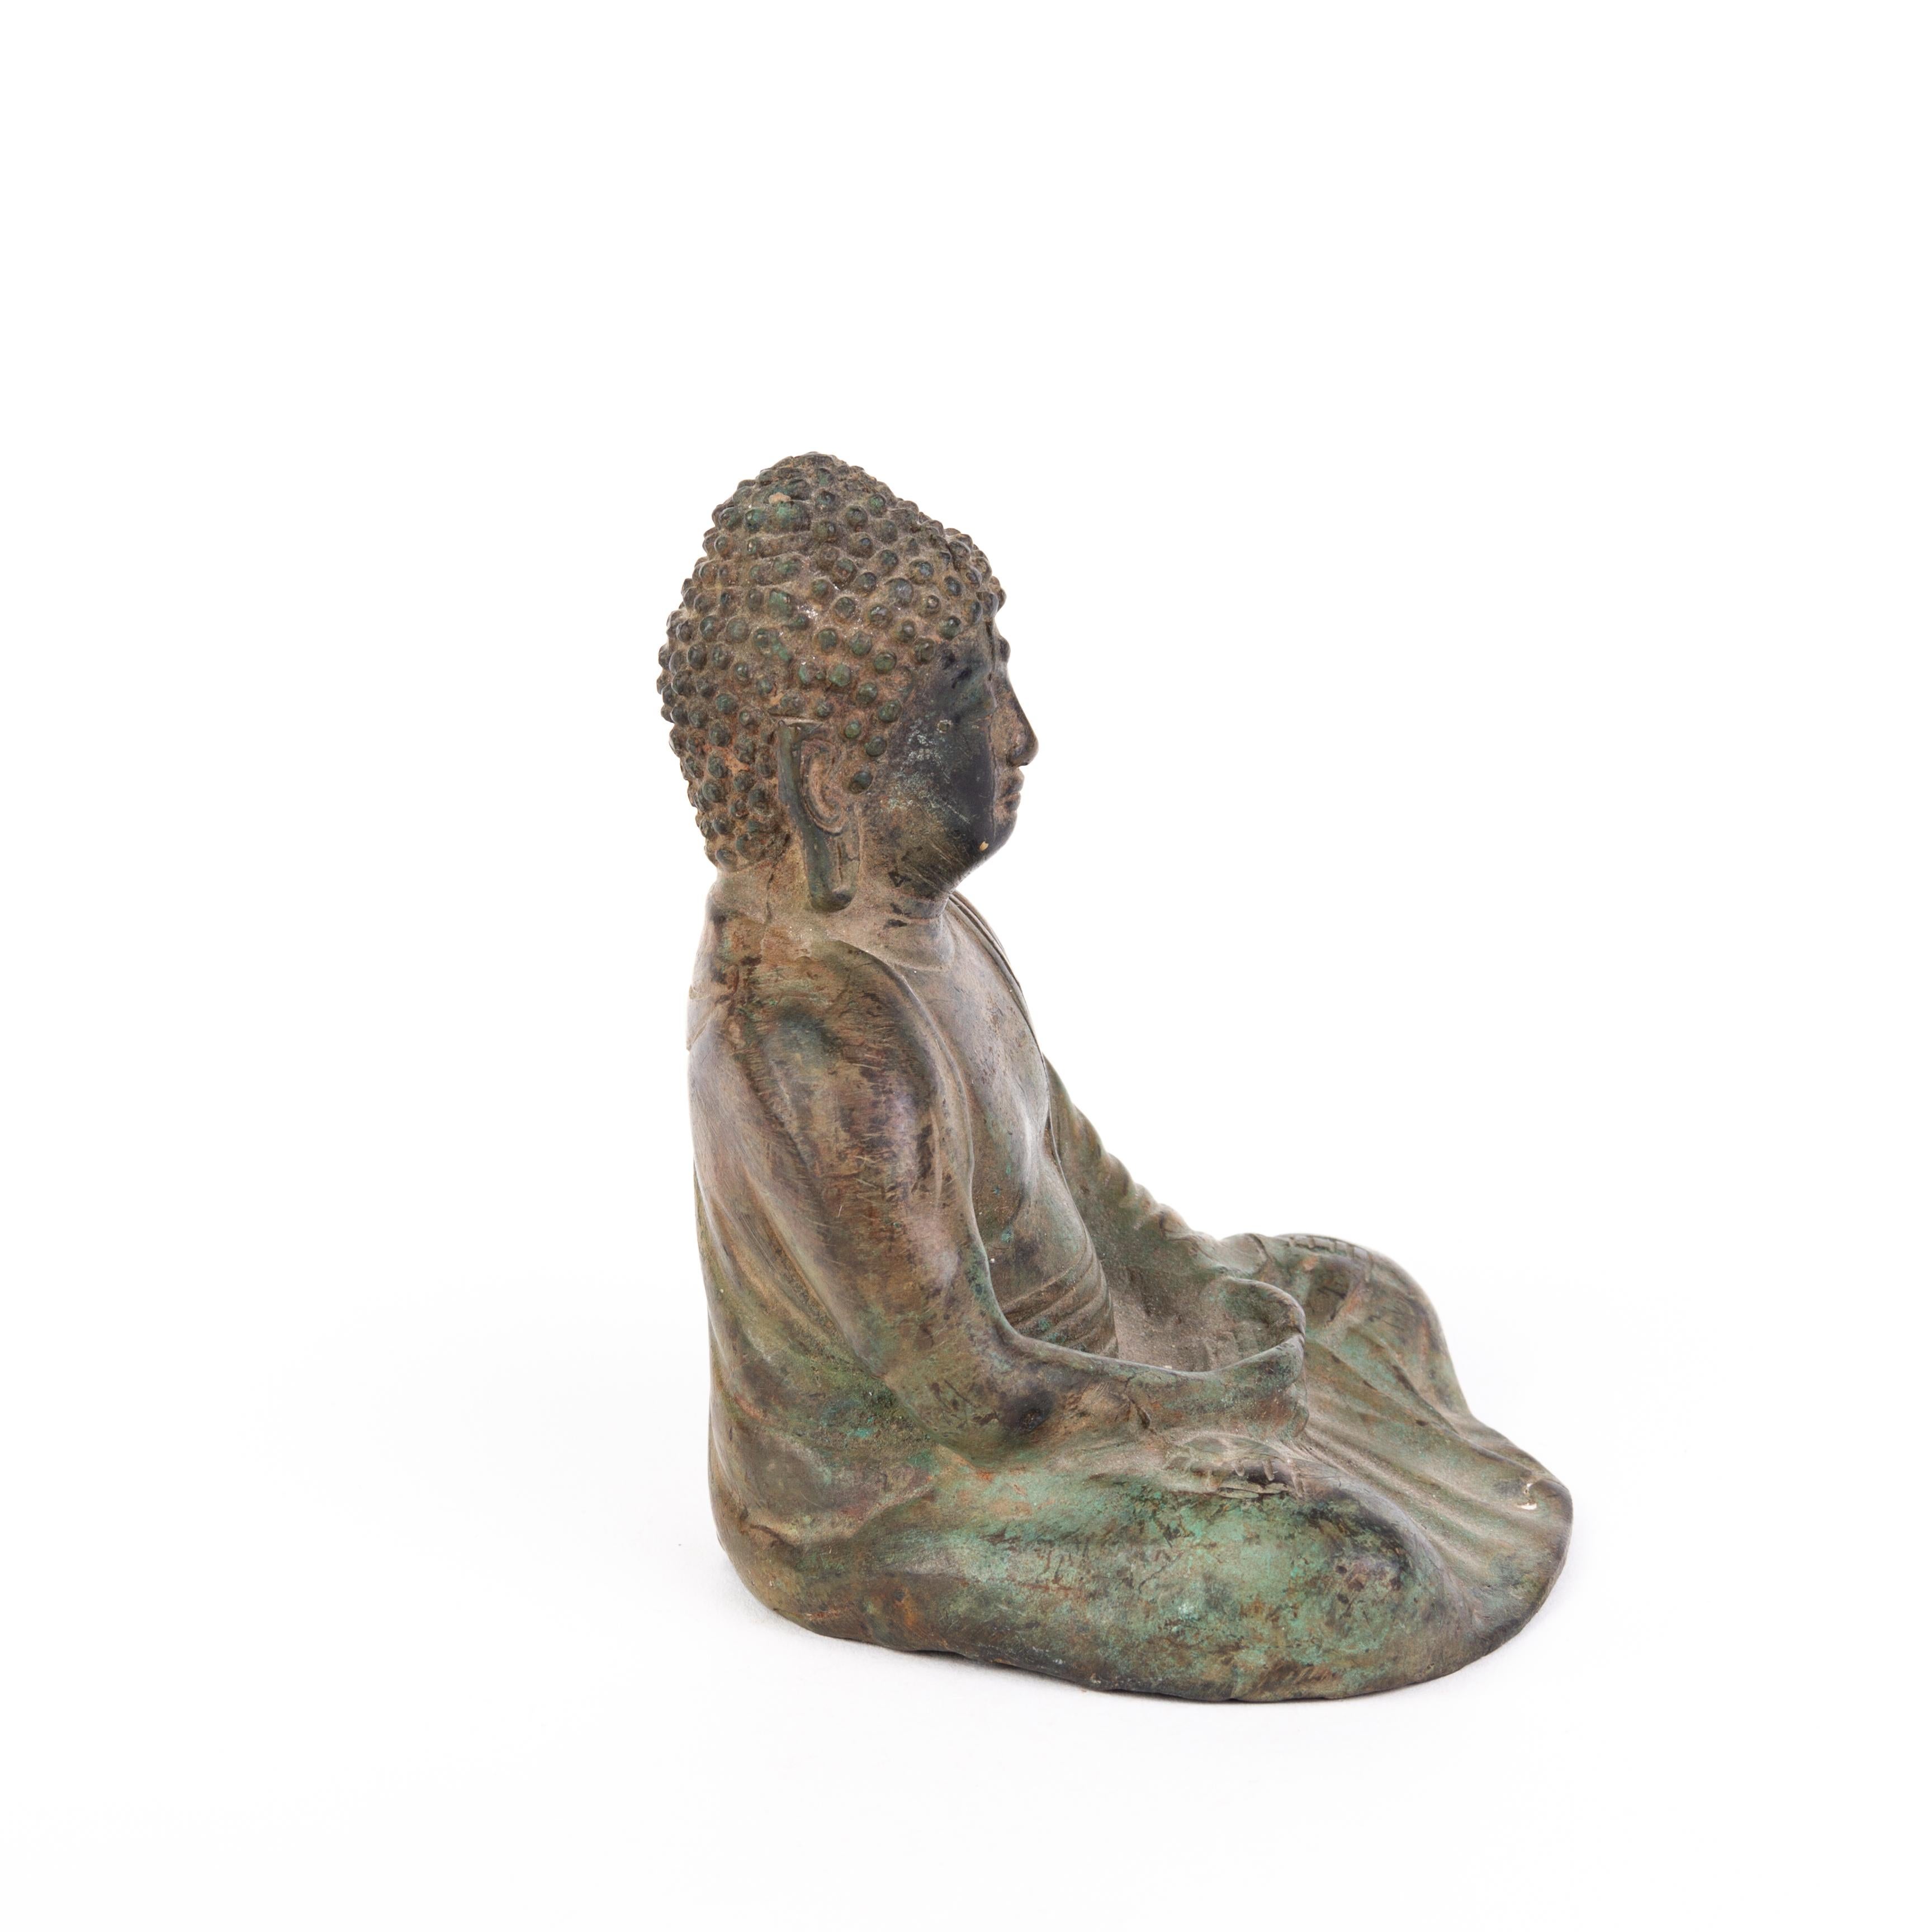 Chinese bronze Sculpture of Buddha 19th Century Qing
Very good condition.
From a private collection.
Free international shipping.